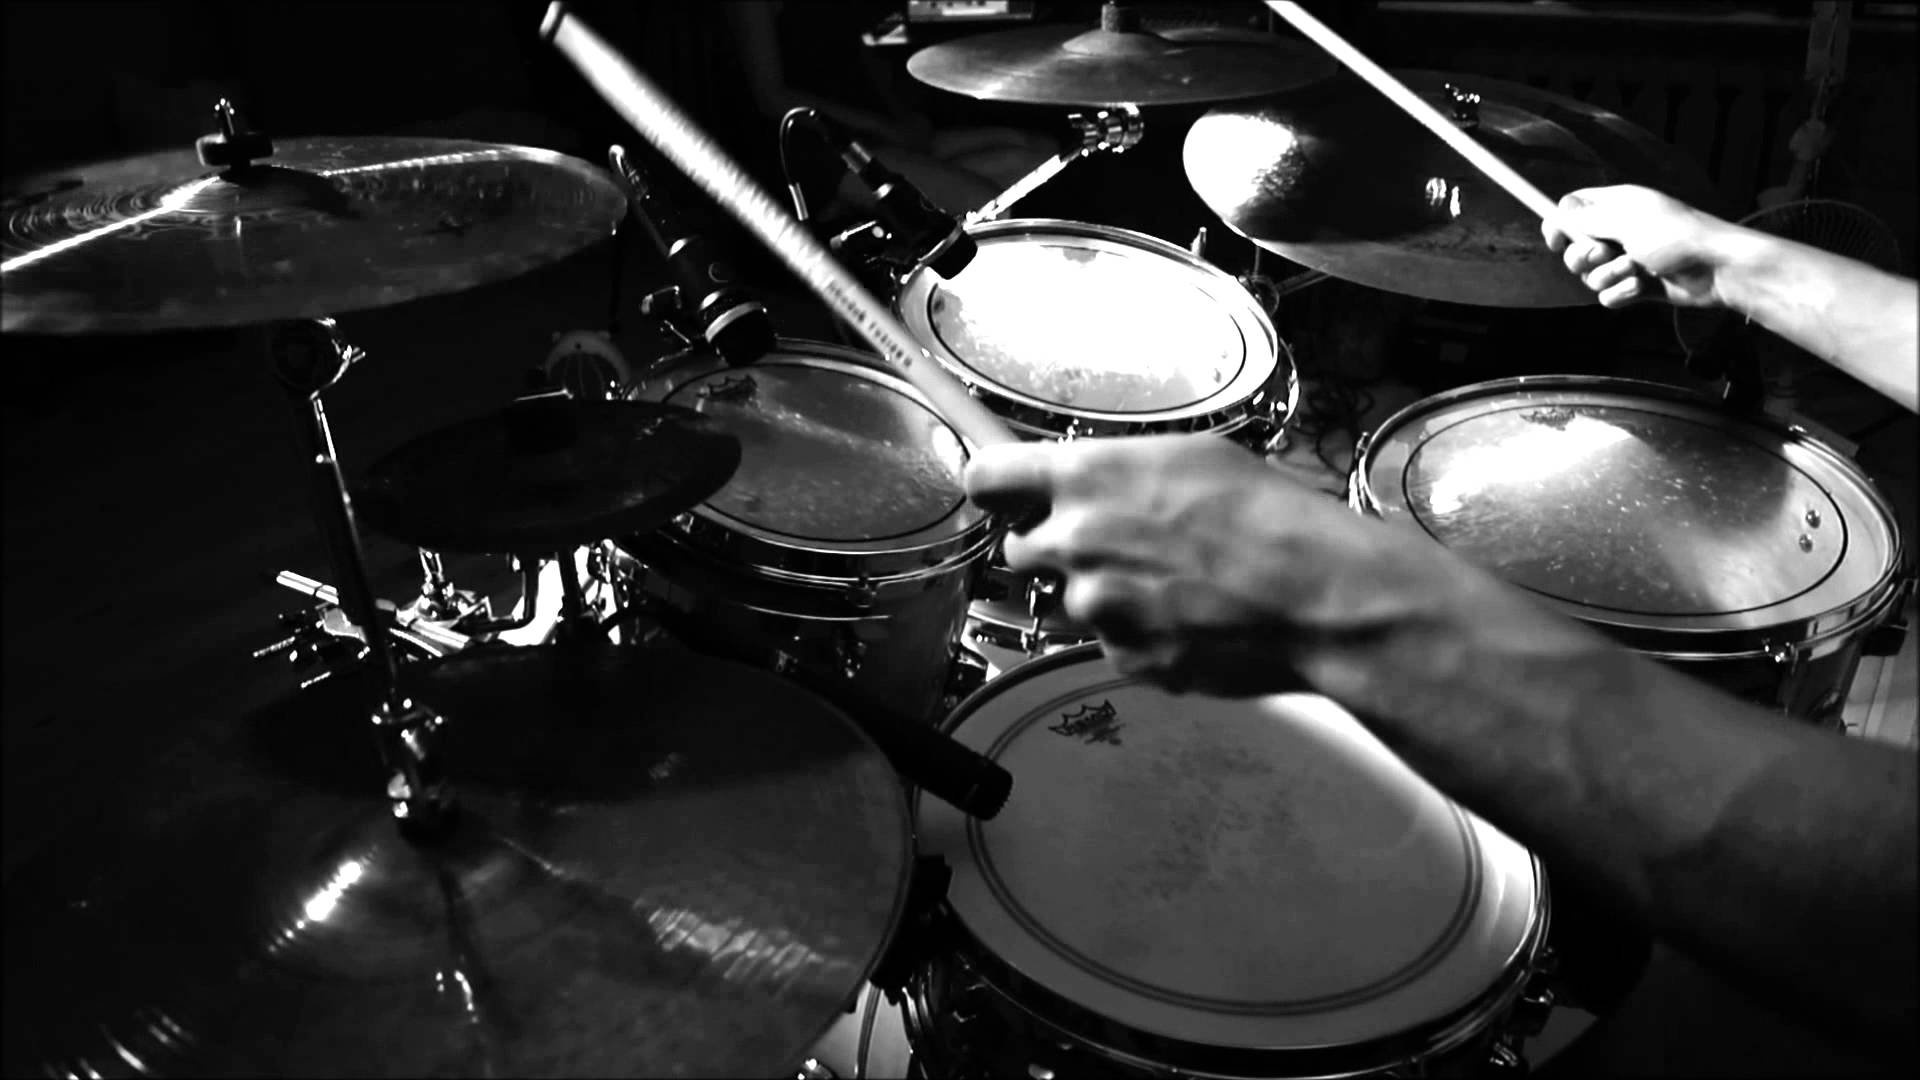 Drums: Professional Drummer Ready To Play, Tom-Toms, Cymbals, Black-And-White. 1920x1080 Full HD Wallpaper.